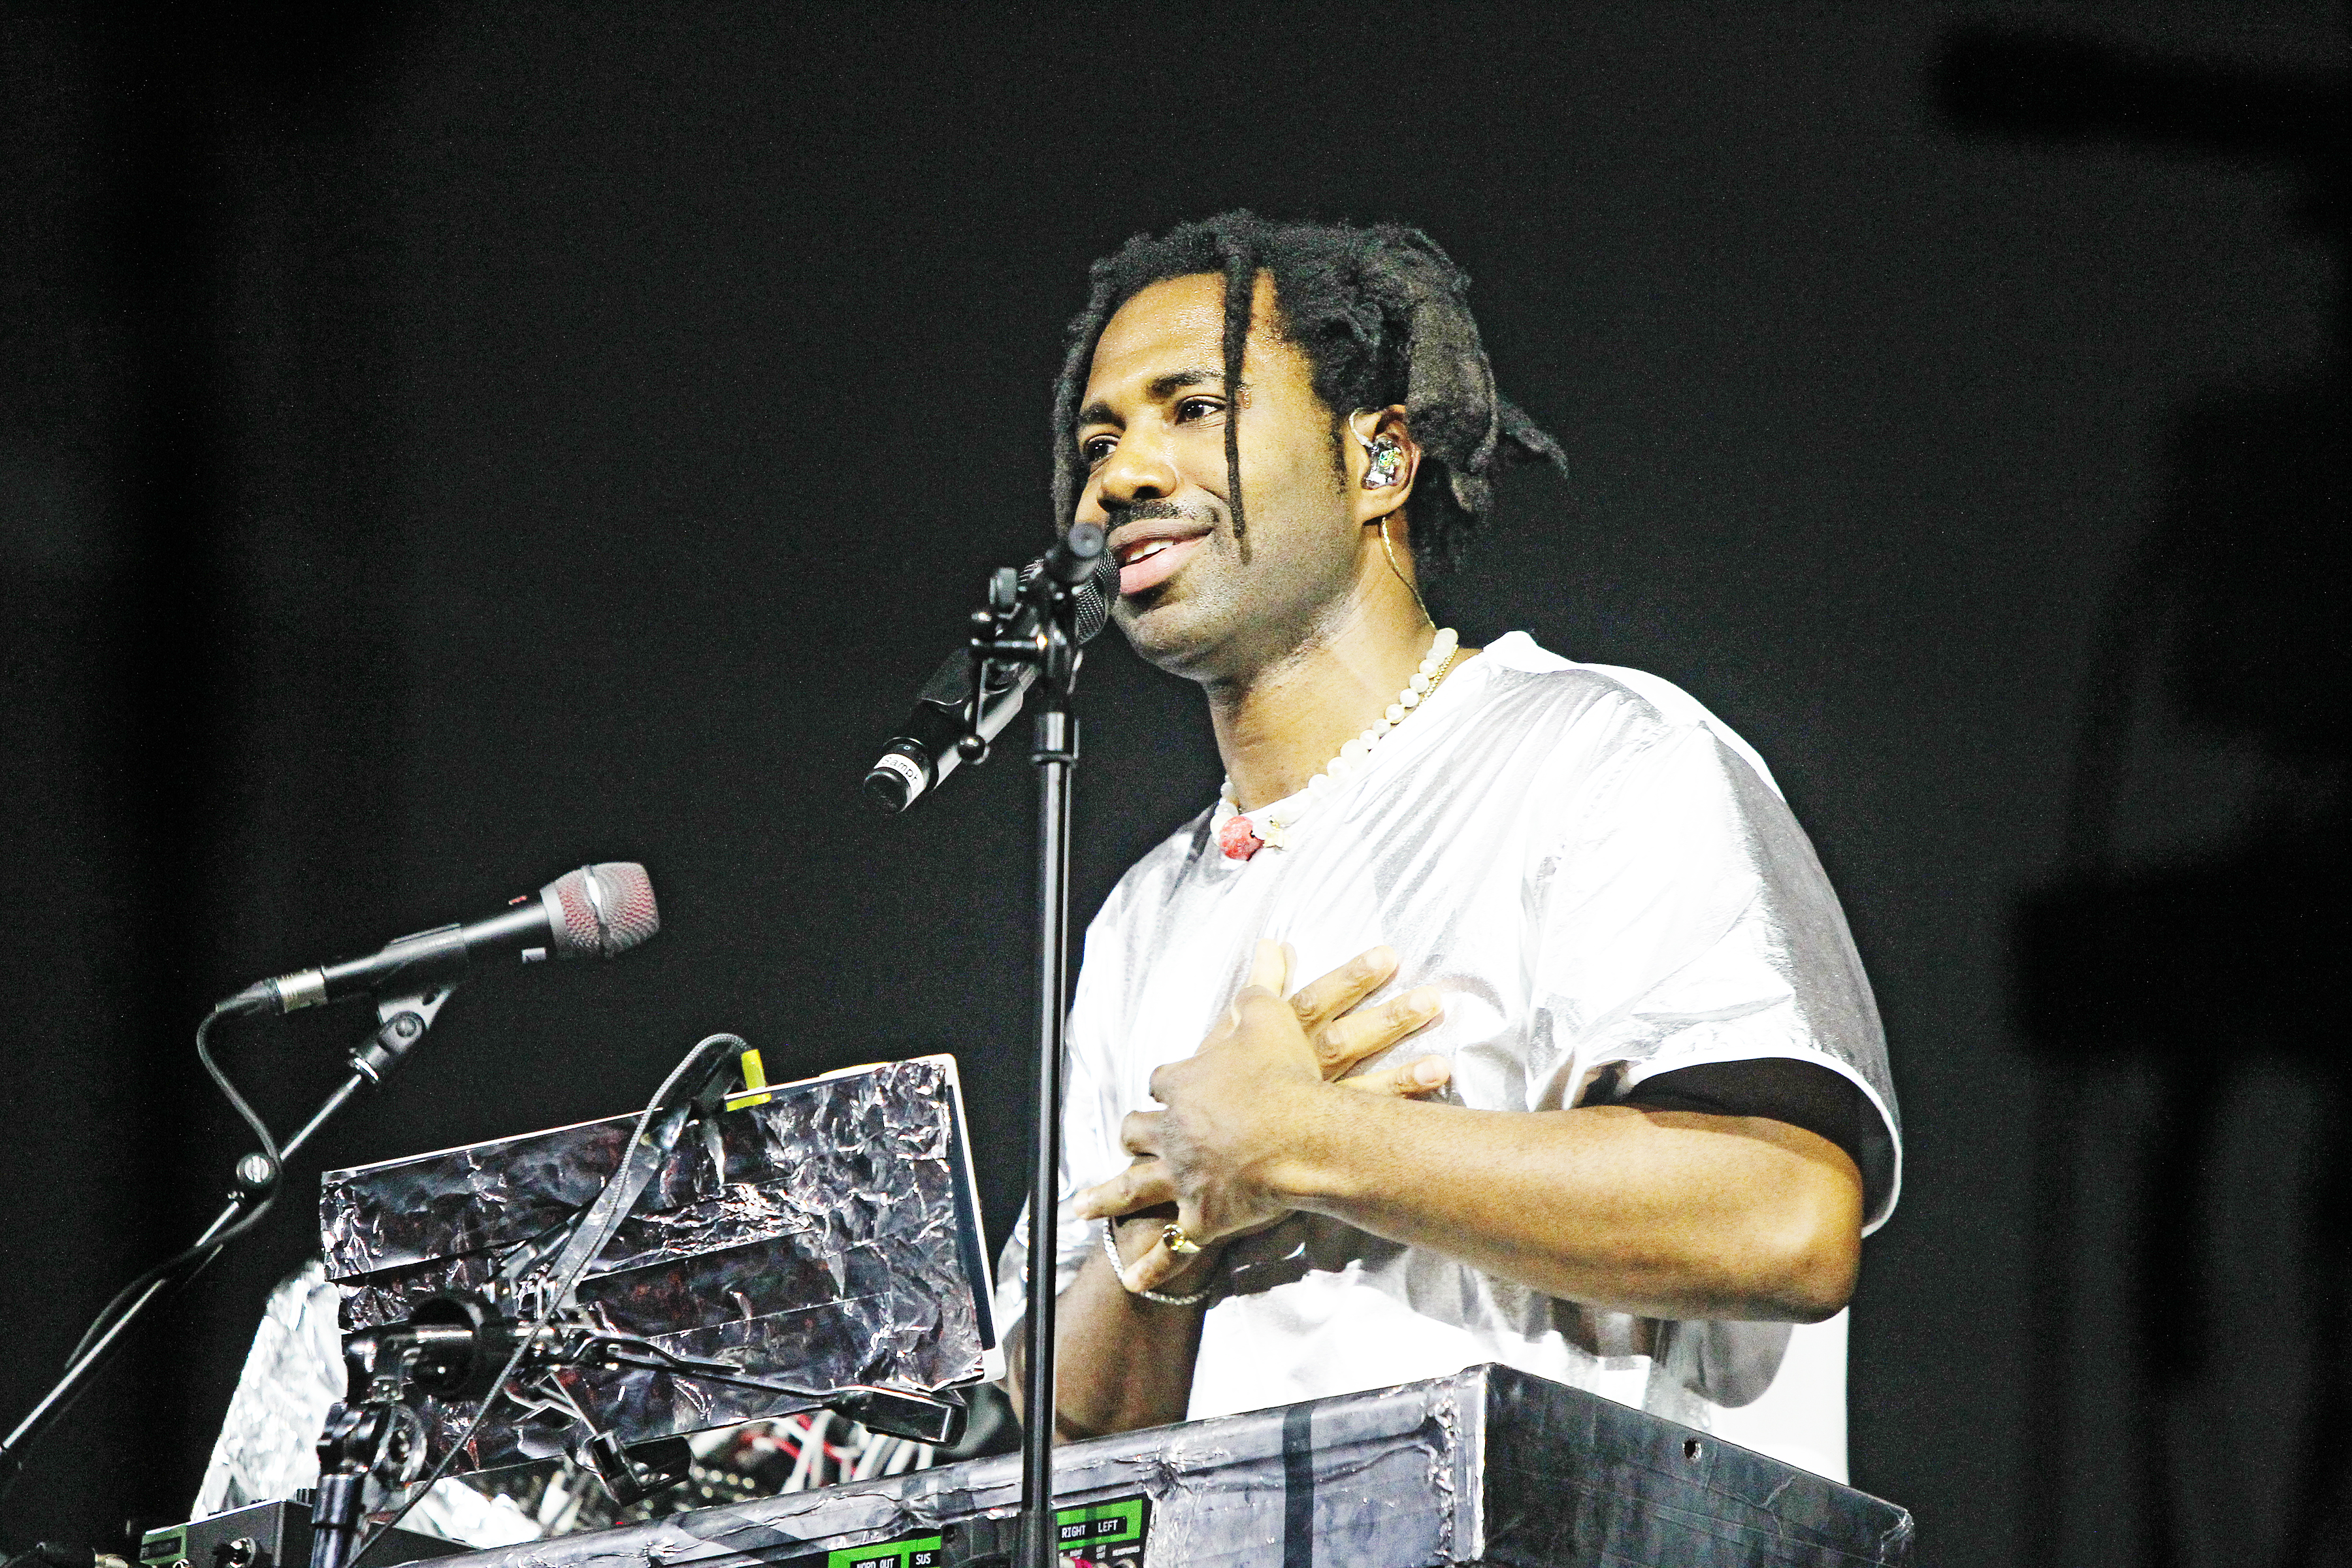 Sampha — no wonder everyone from Beyoncé to Drake wants to duet with him